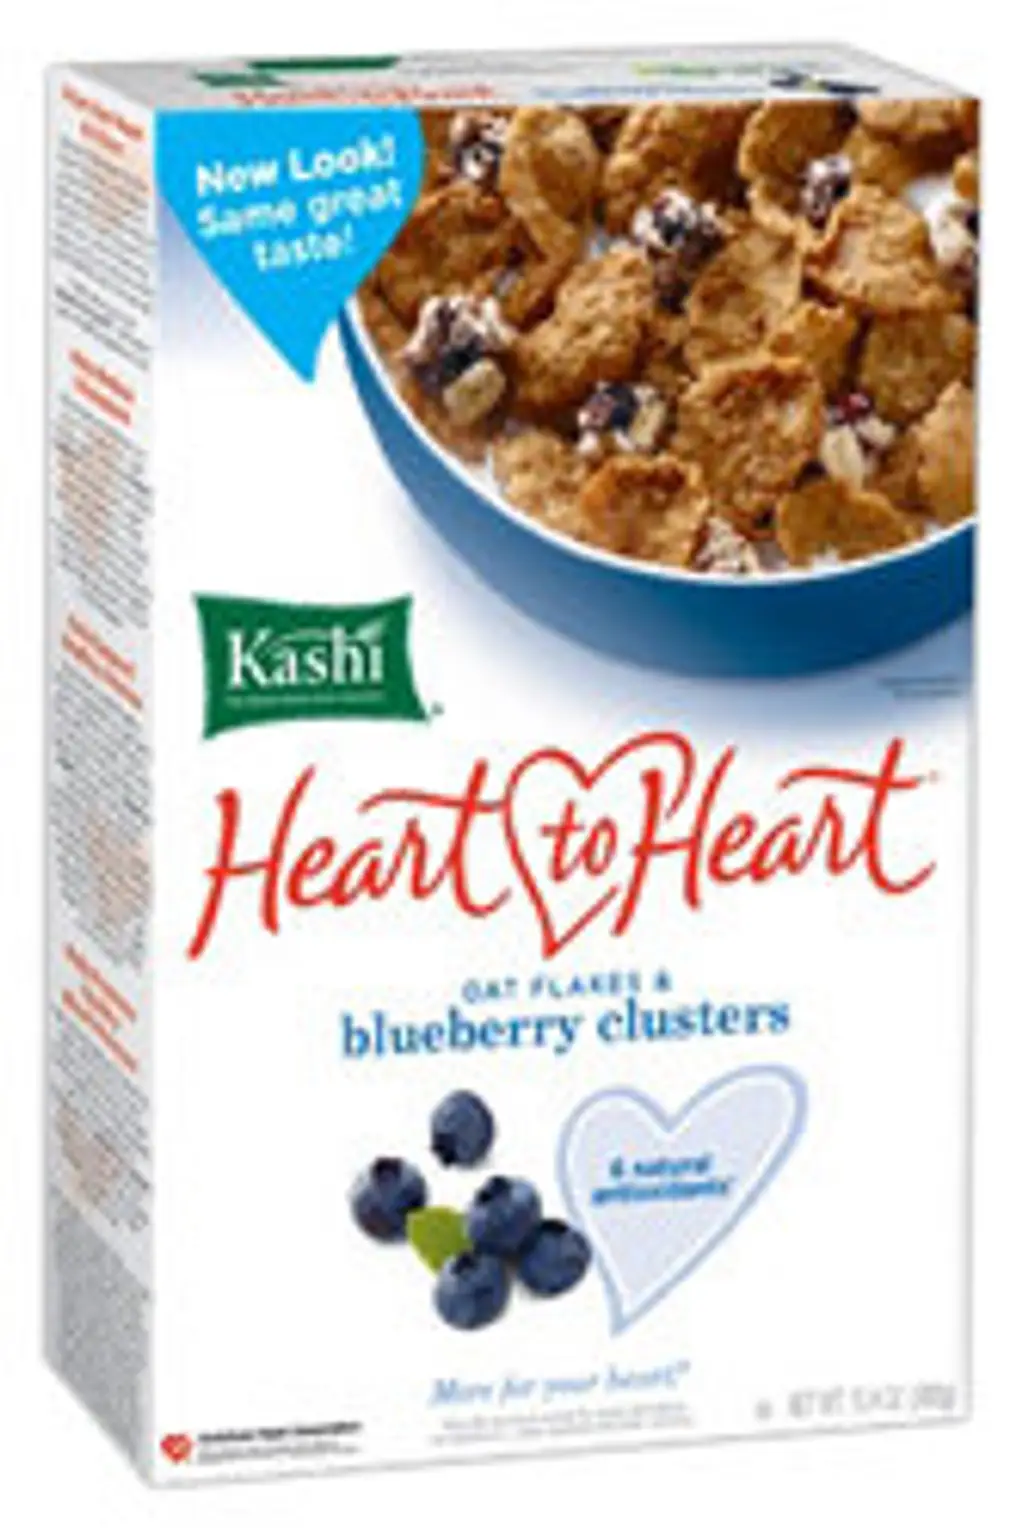 Kashi Heart to Heart Oat Flakes and Wild Blueberry Clusters